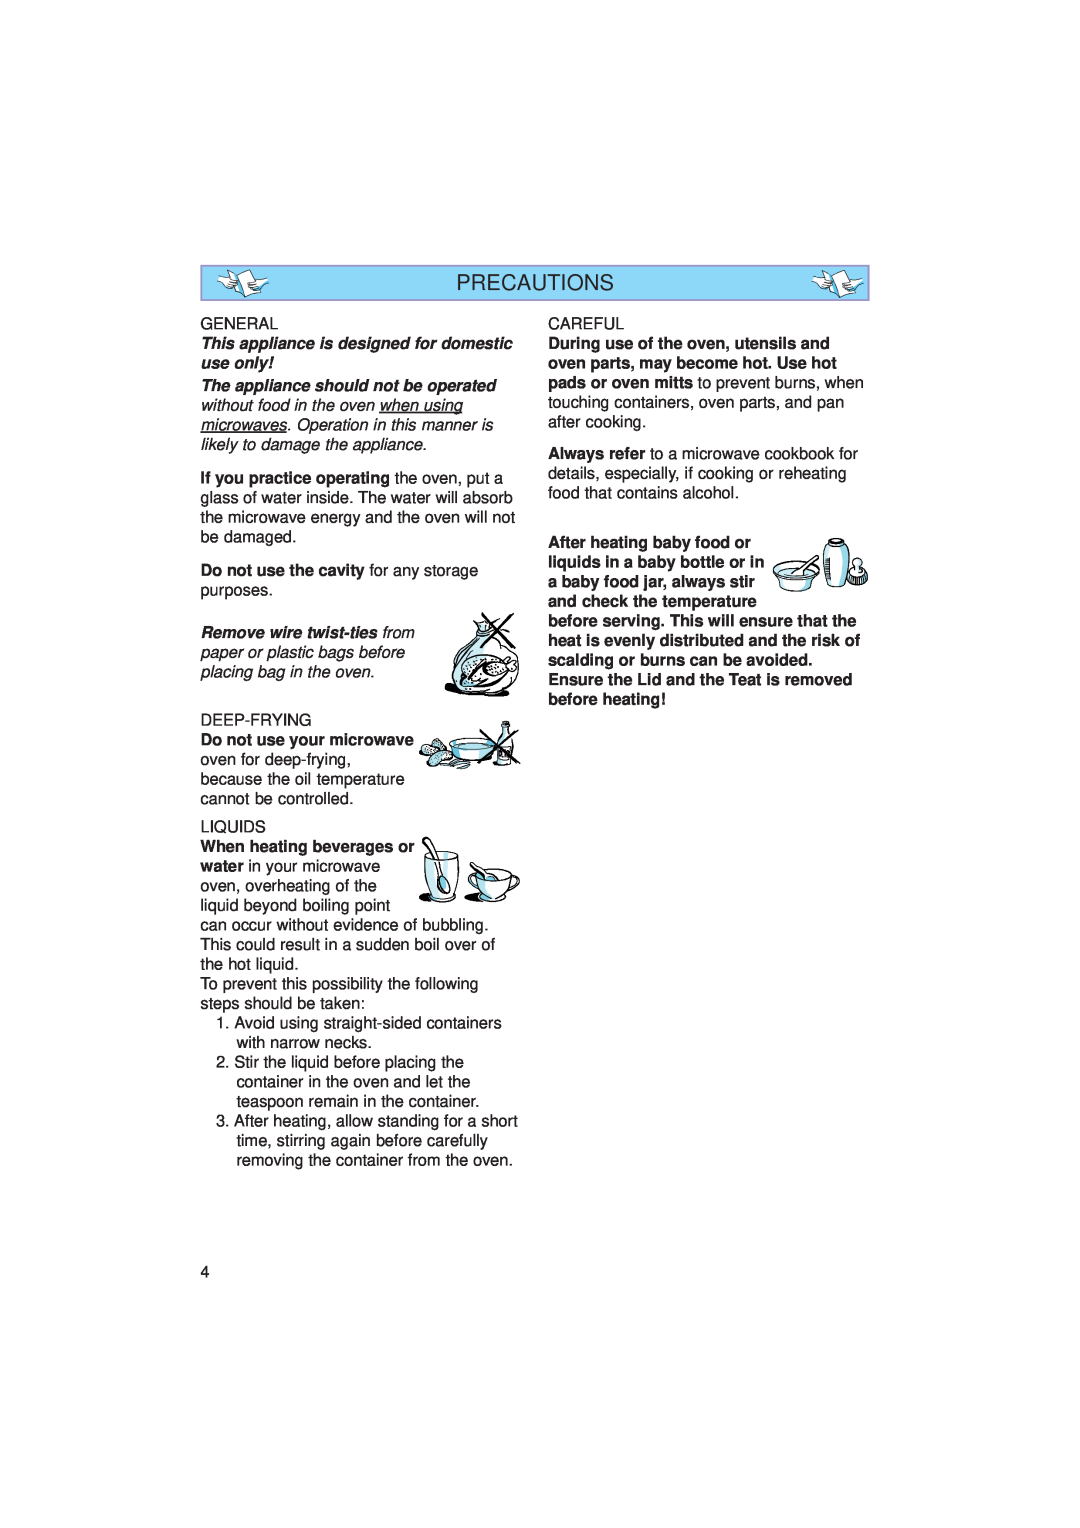 Whirlpool JT 359 manual Precautions, This appliance is designed for domestic use only 